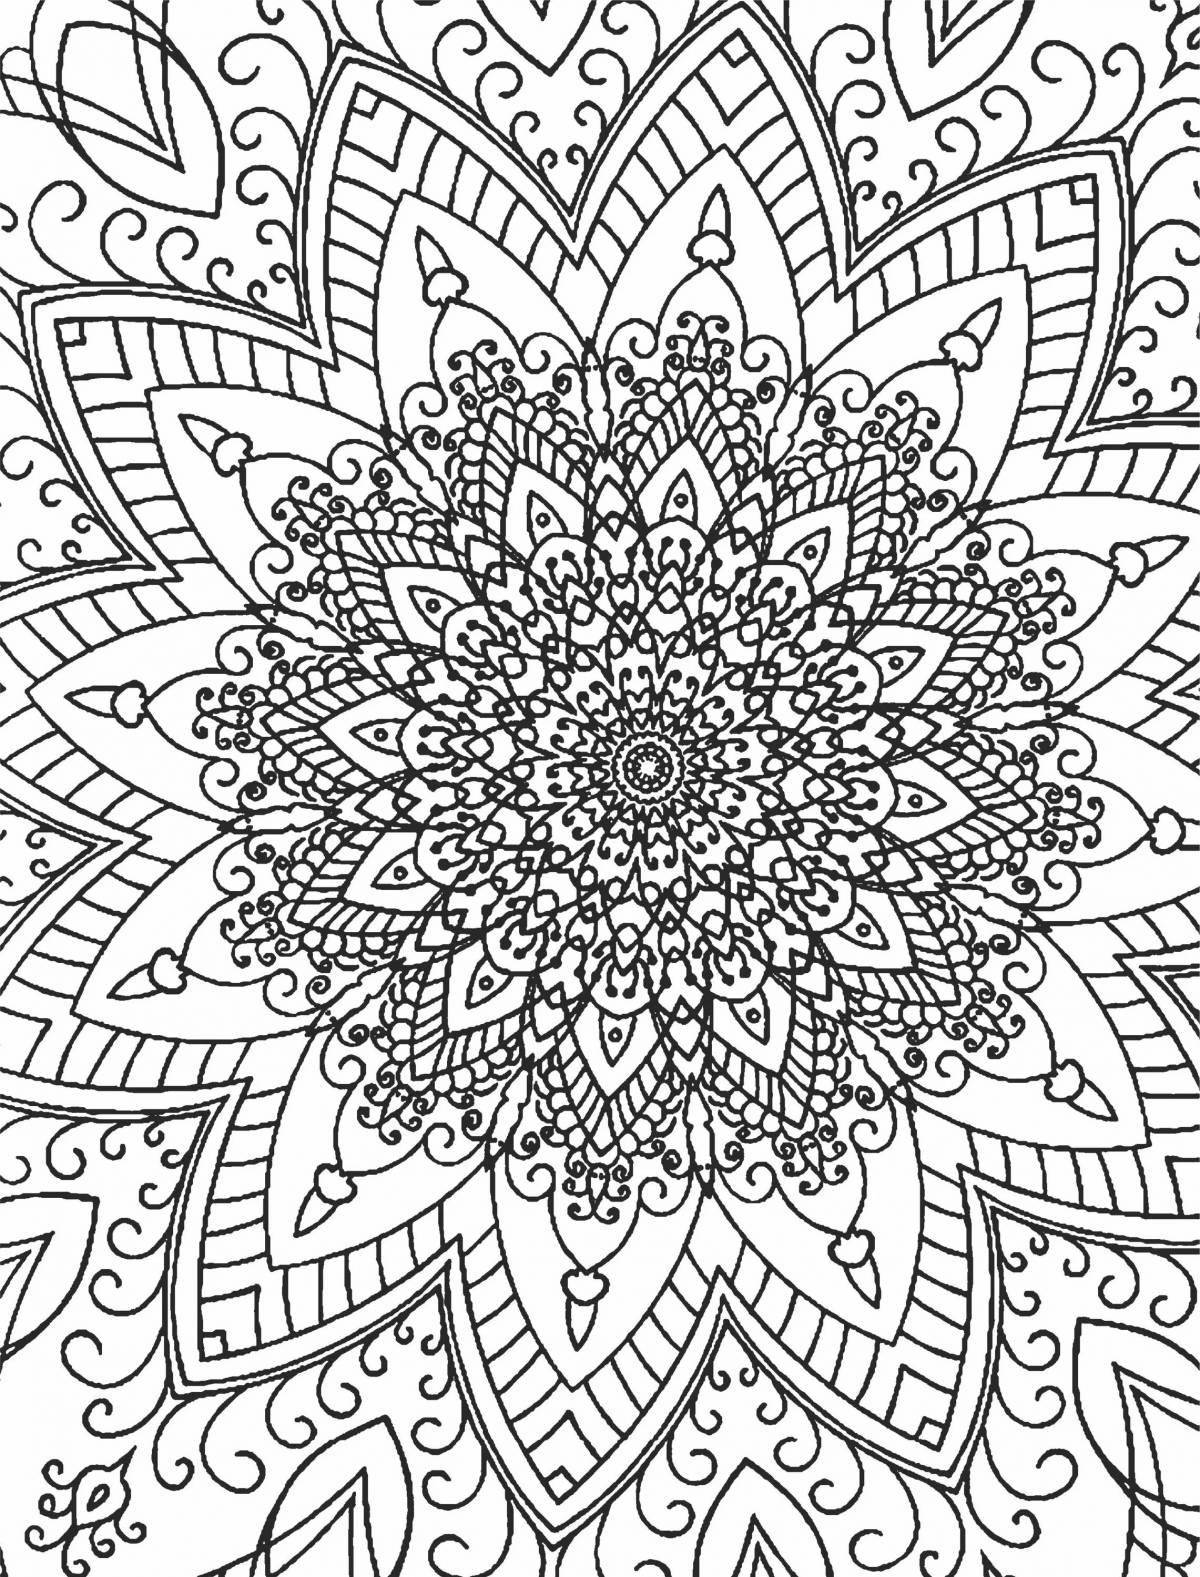 Coloring book with exquisite pattern